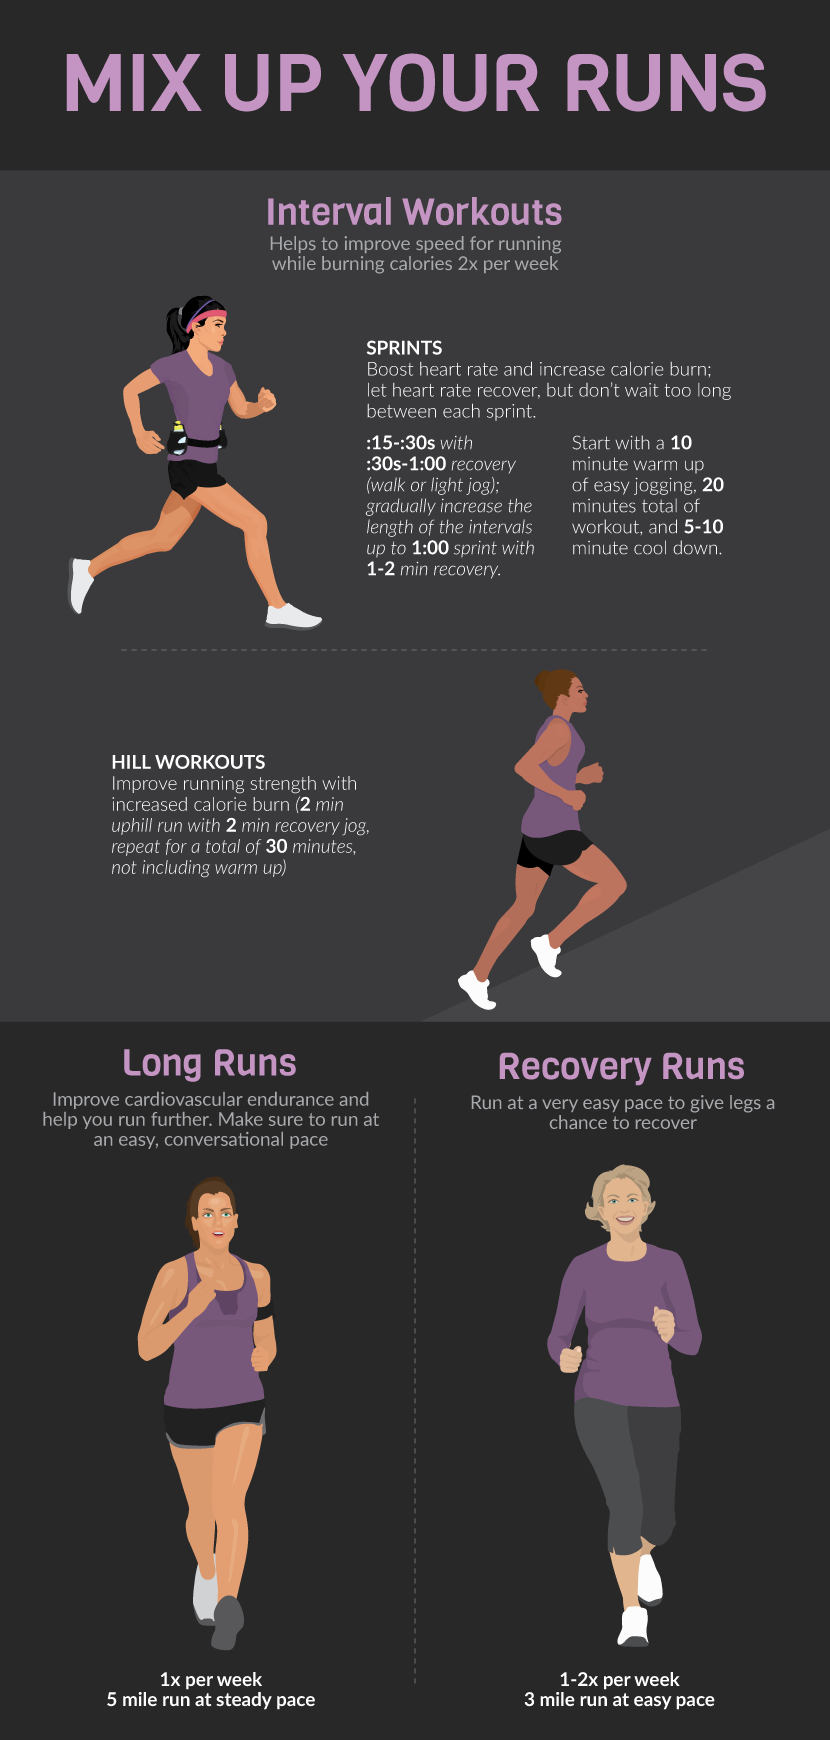 A Workout after a Run: What You Need to Know